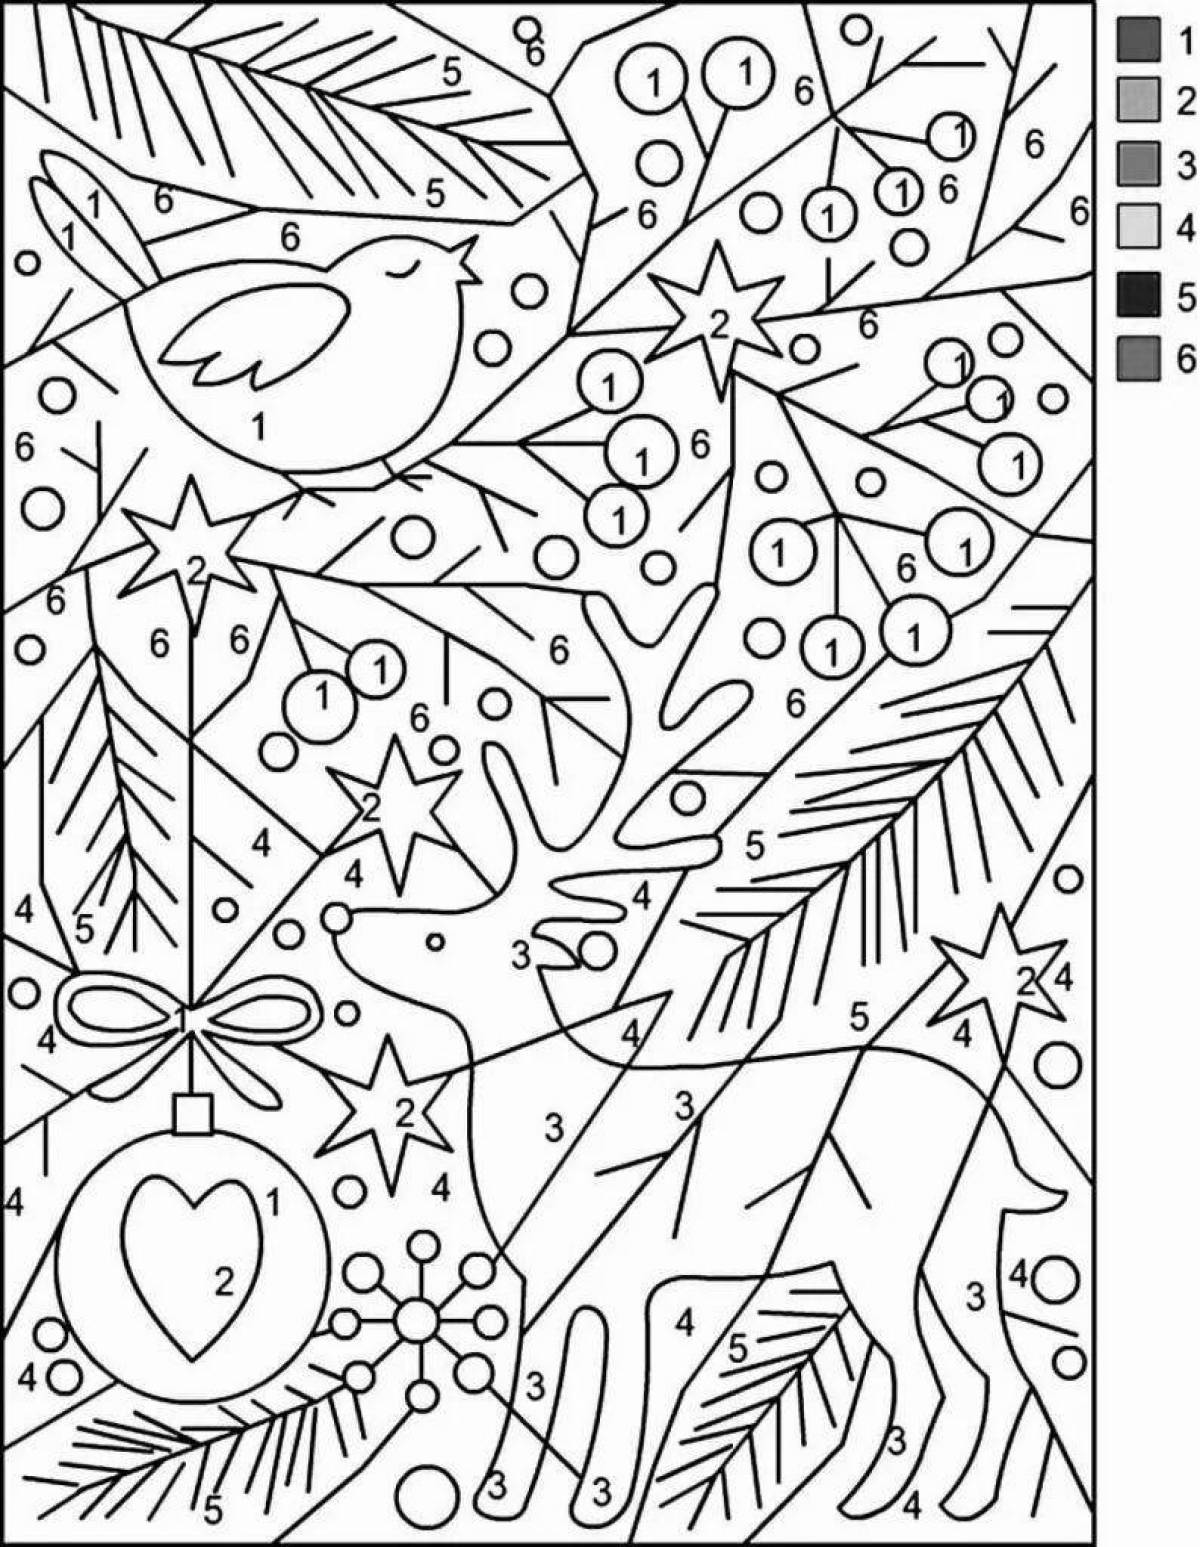 Shining Winter by Numbers coloring page